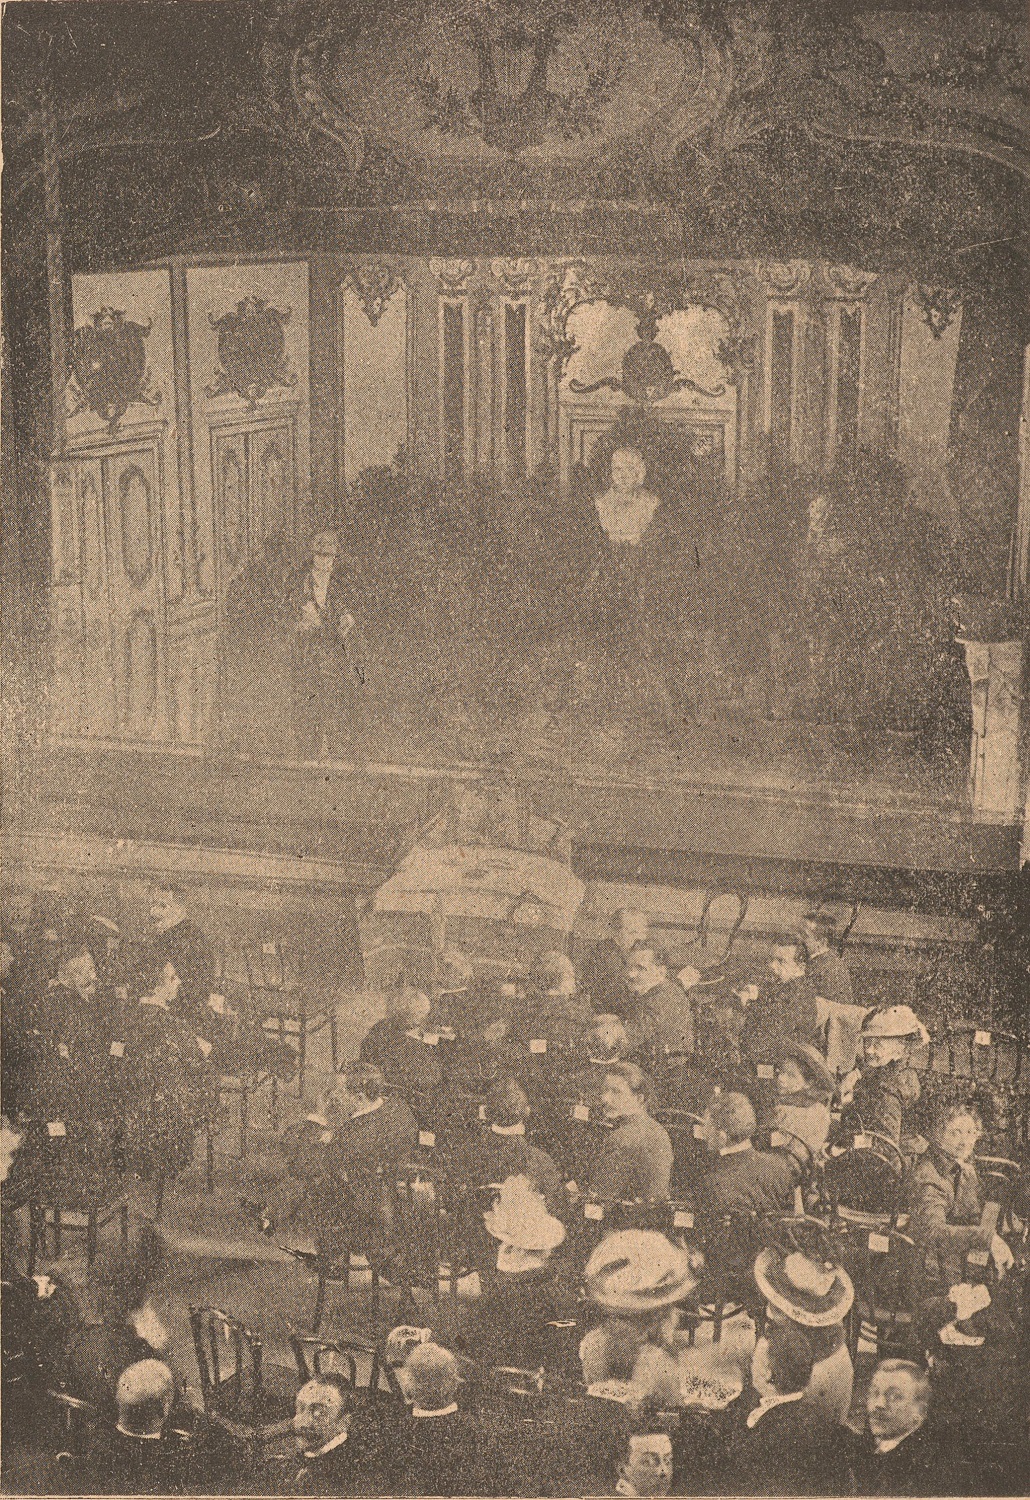 Inside the People's Theatre, where the meeting took place. Photo from the opening day of the theatre in 1901.